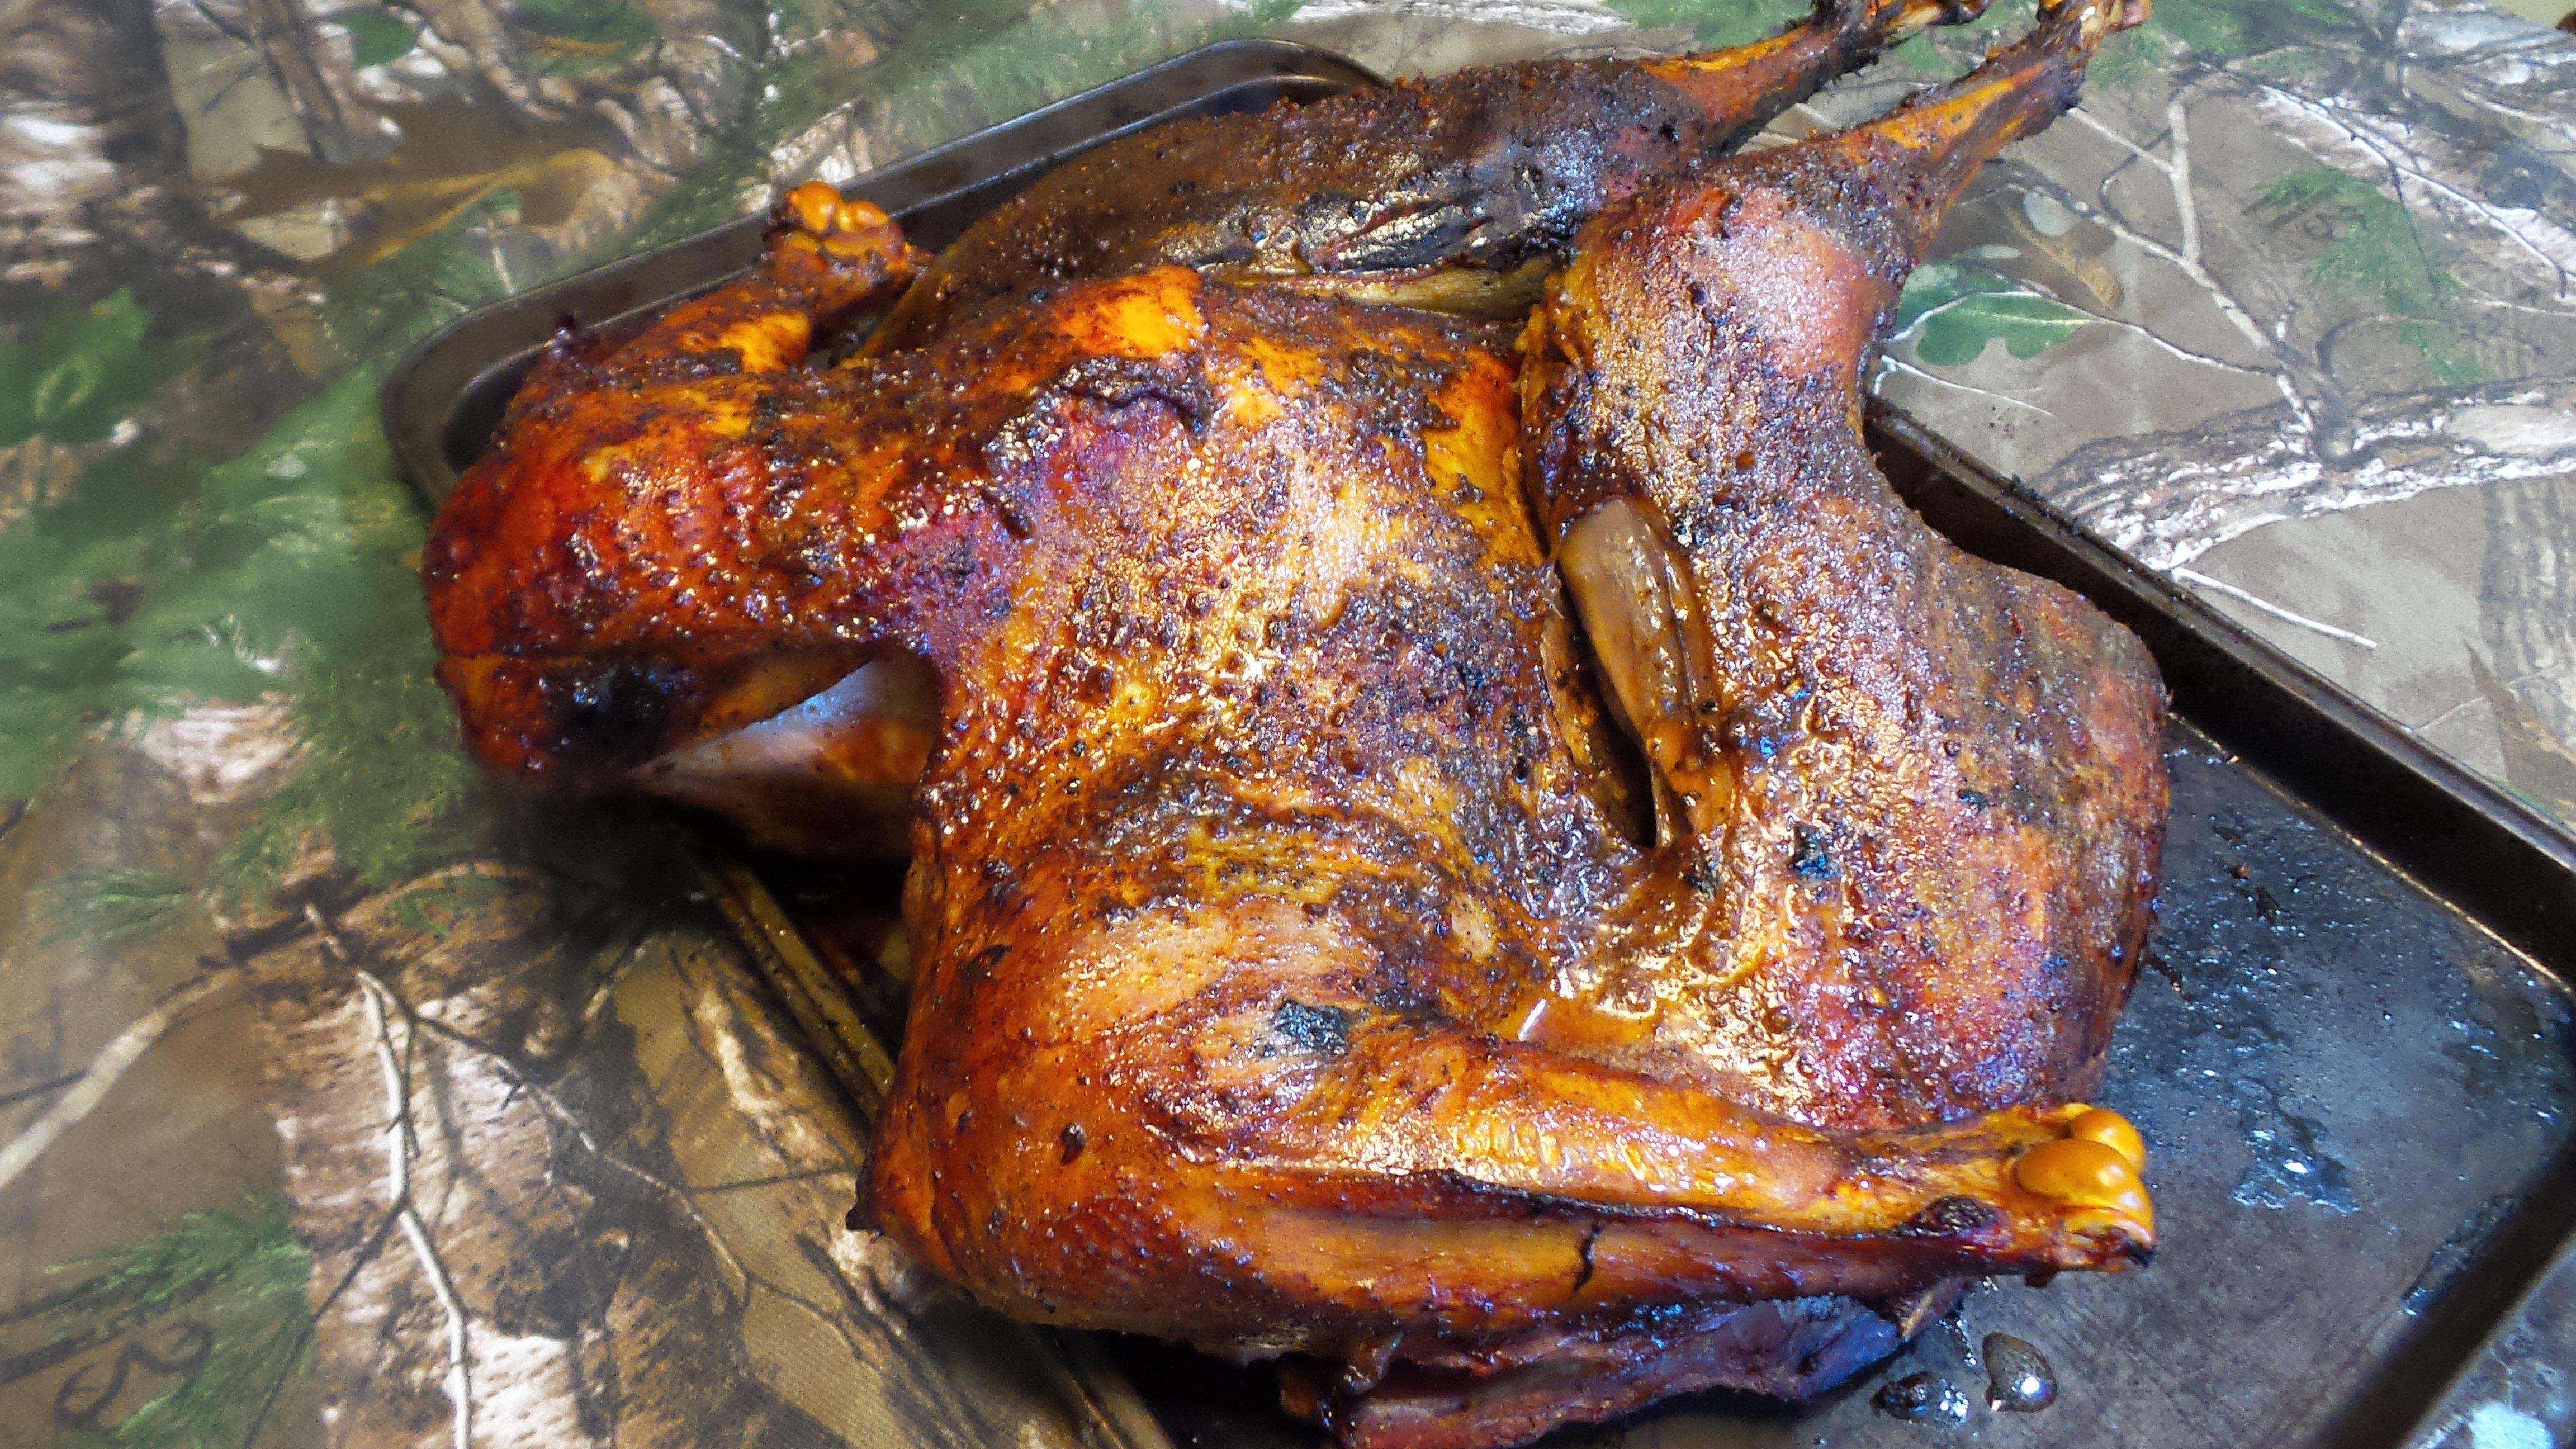 Adding moisture and not overcooking are the secrets to smoking a wild turkey.